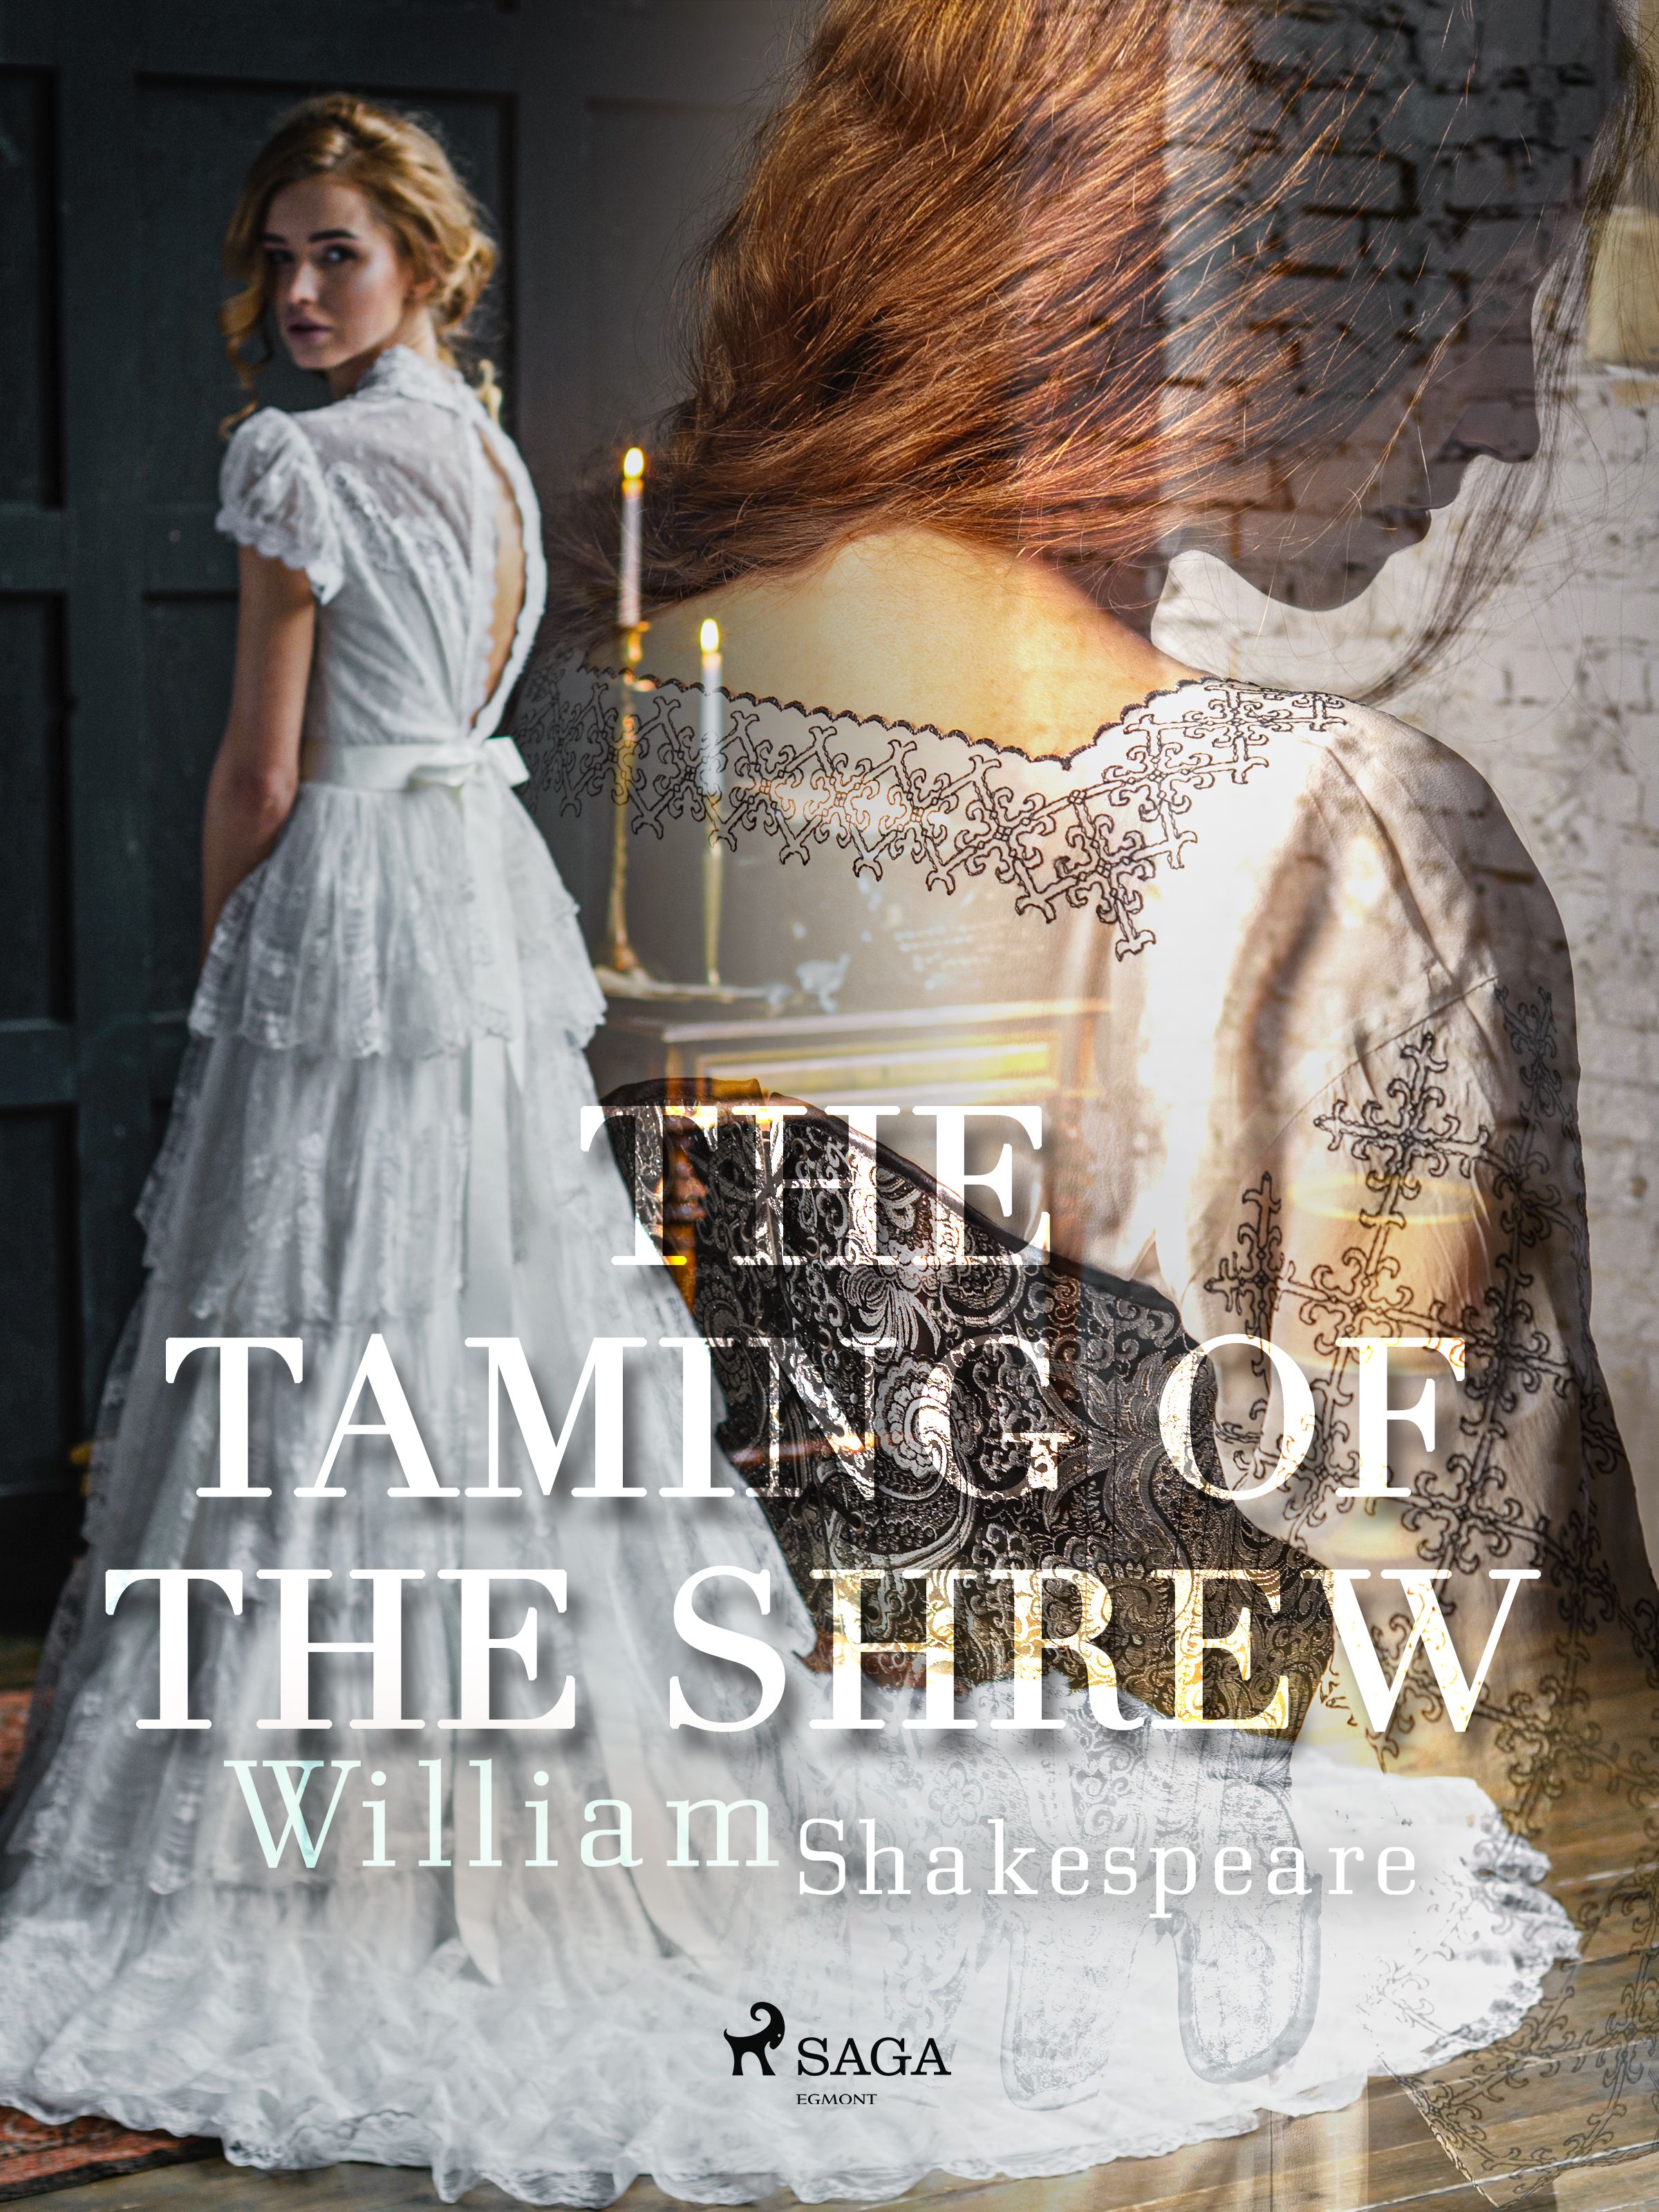 The Taming of the Shrew, eBook by William Shakespeare